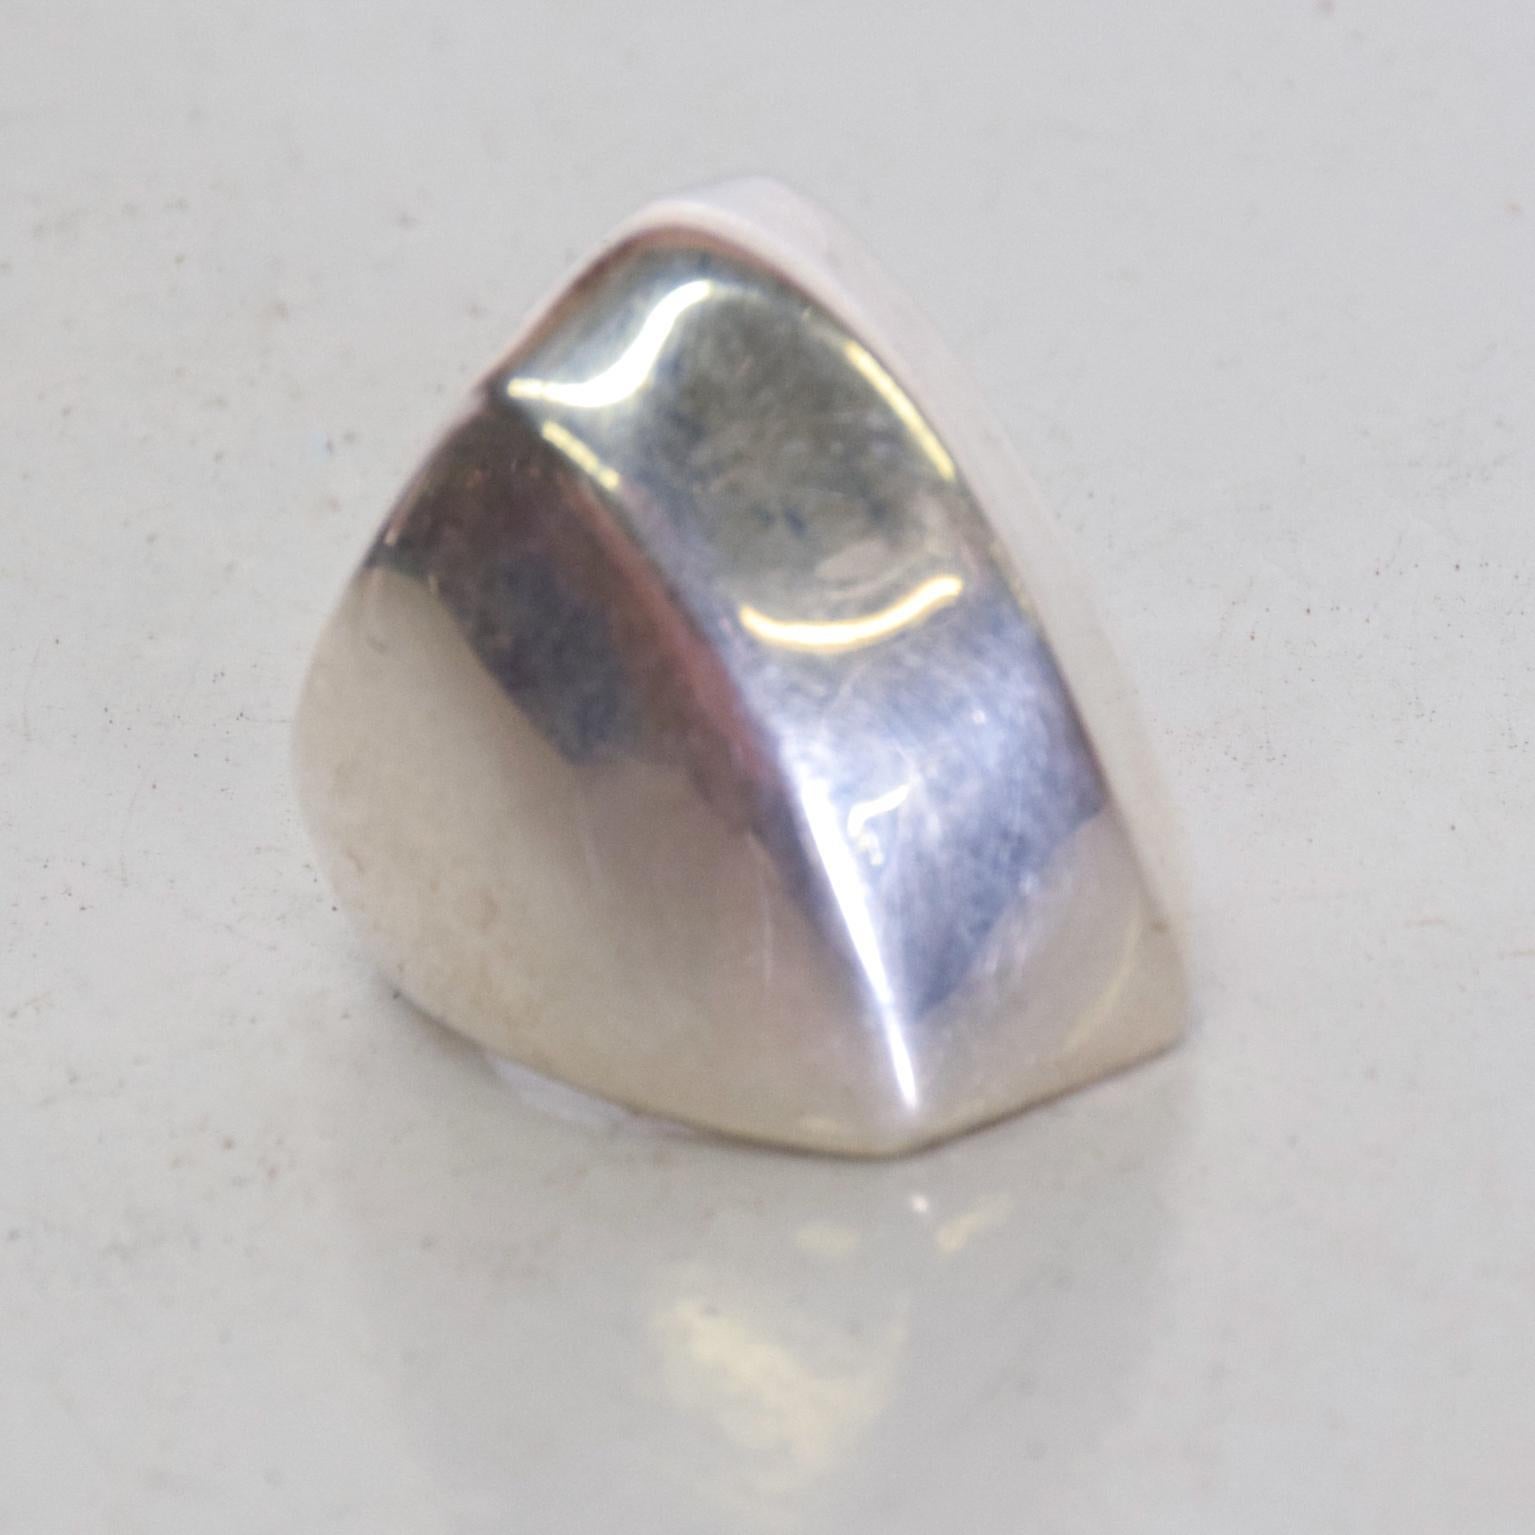 For your consideration, a Mid Century Mexican Modernist Fashion Silver Ring. Stamped on the inside. Dimensions: 1 1/8